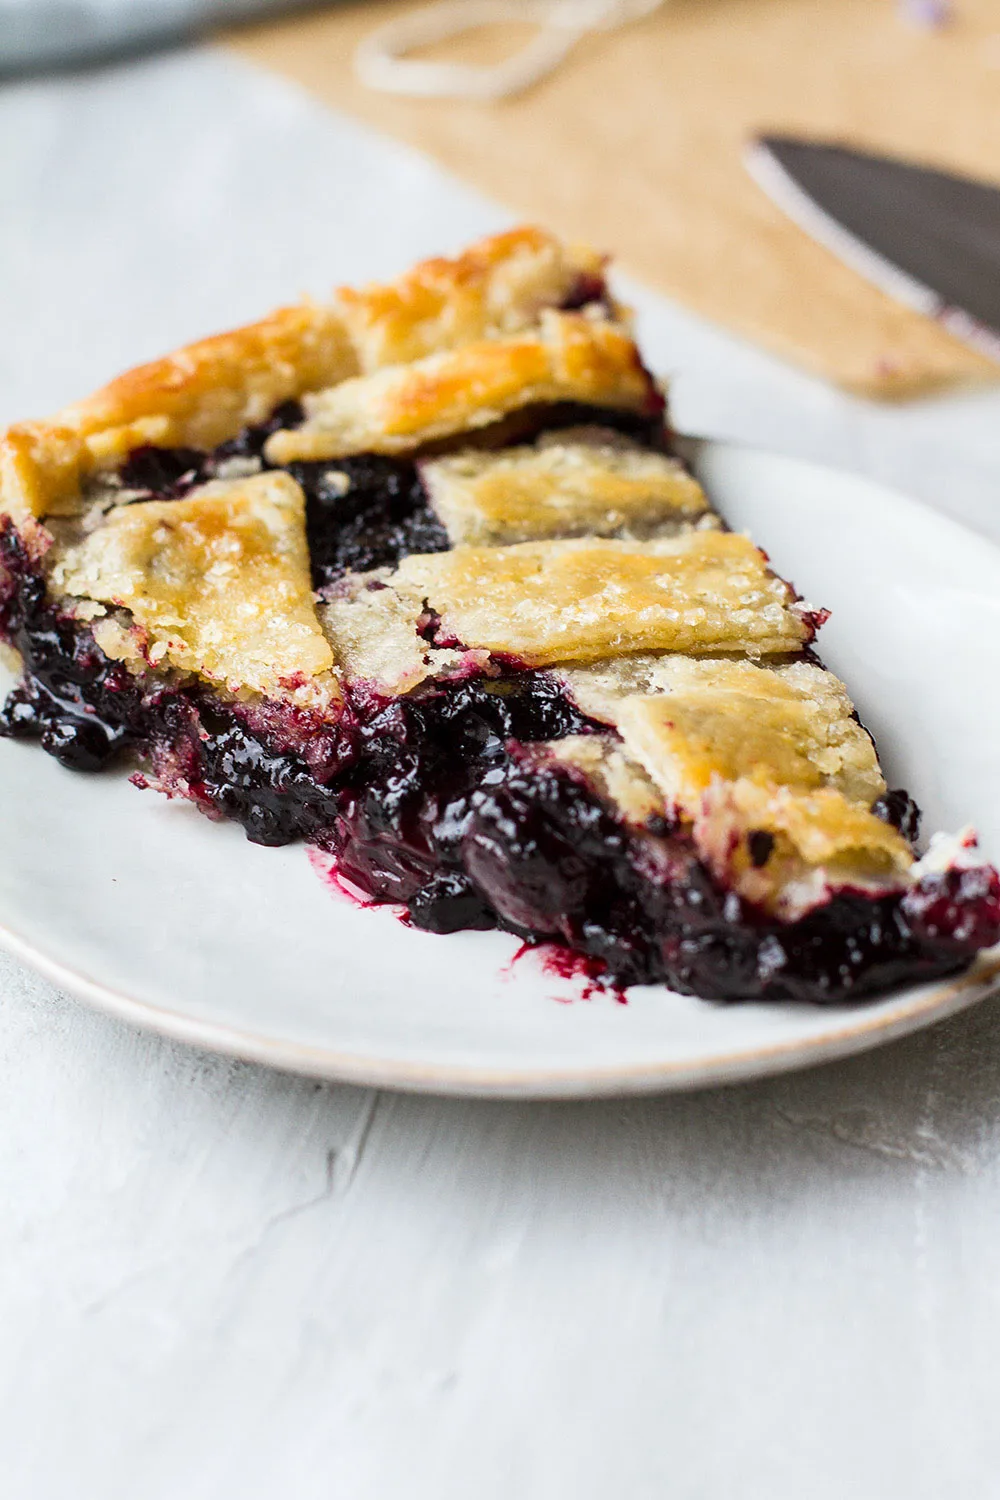 Slice of blueberry pie without runny filling.